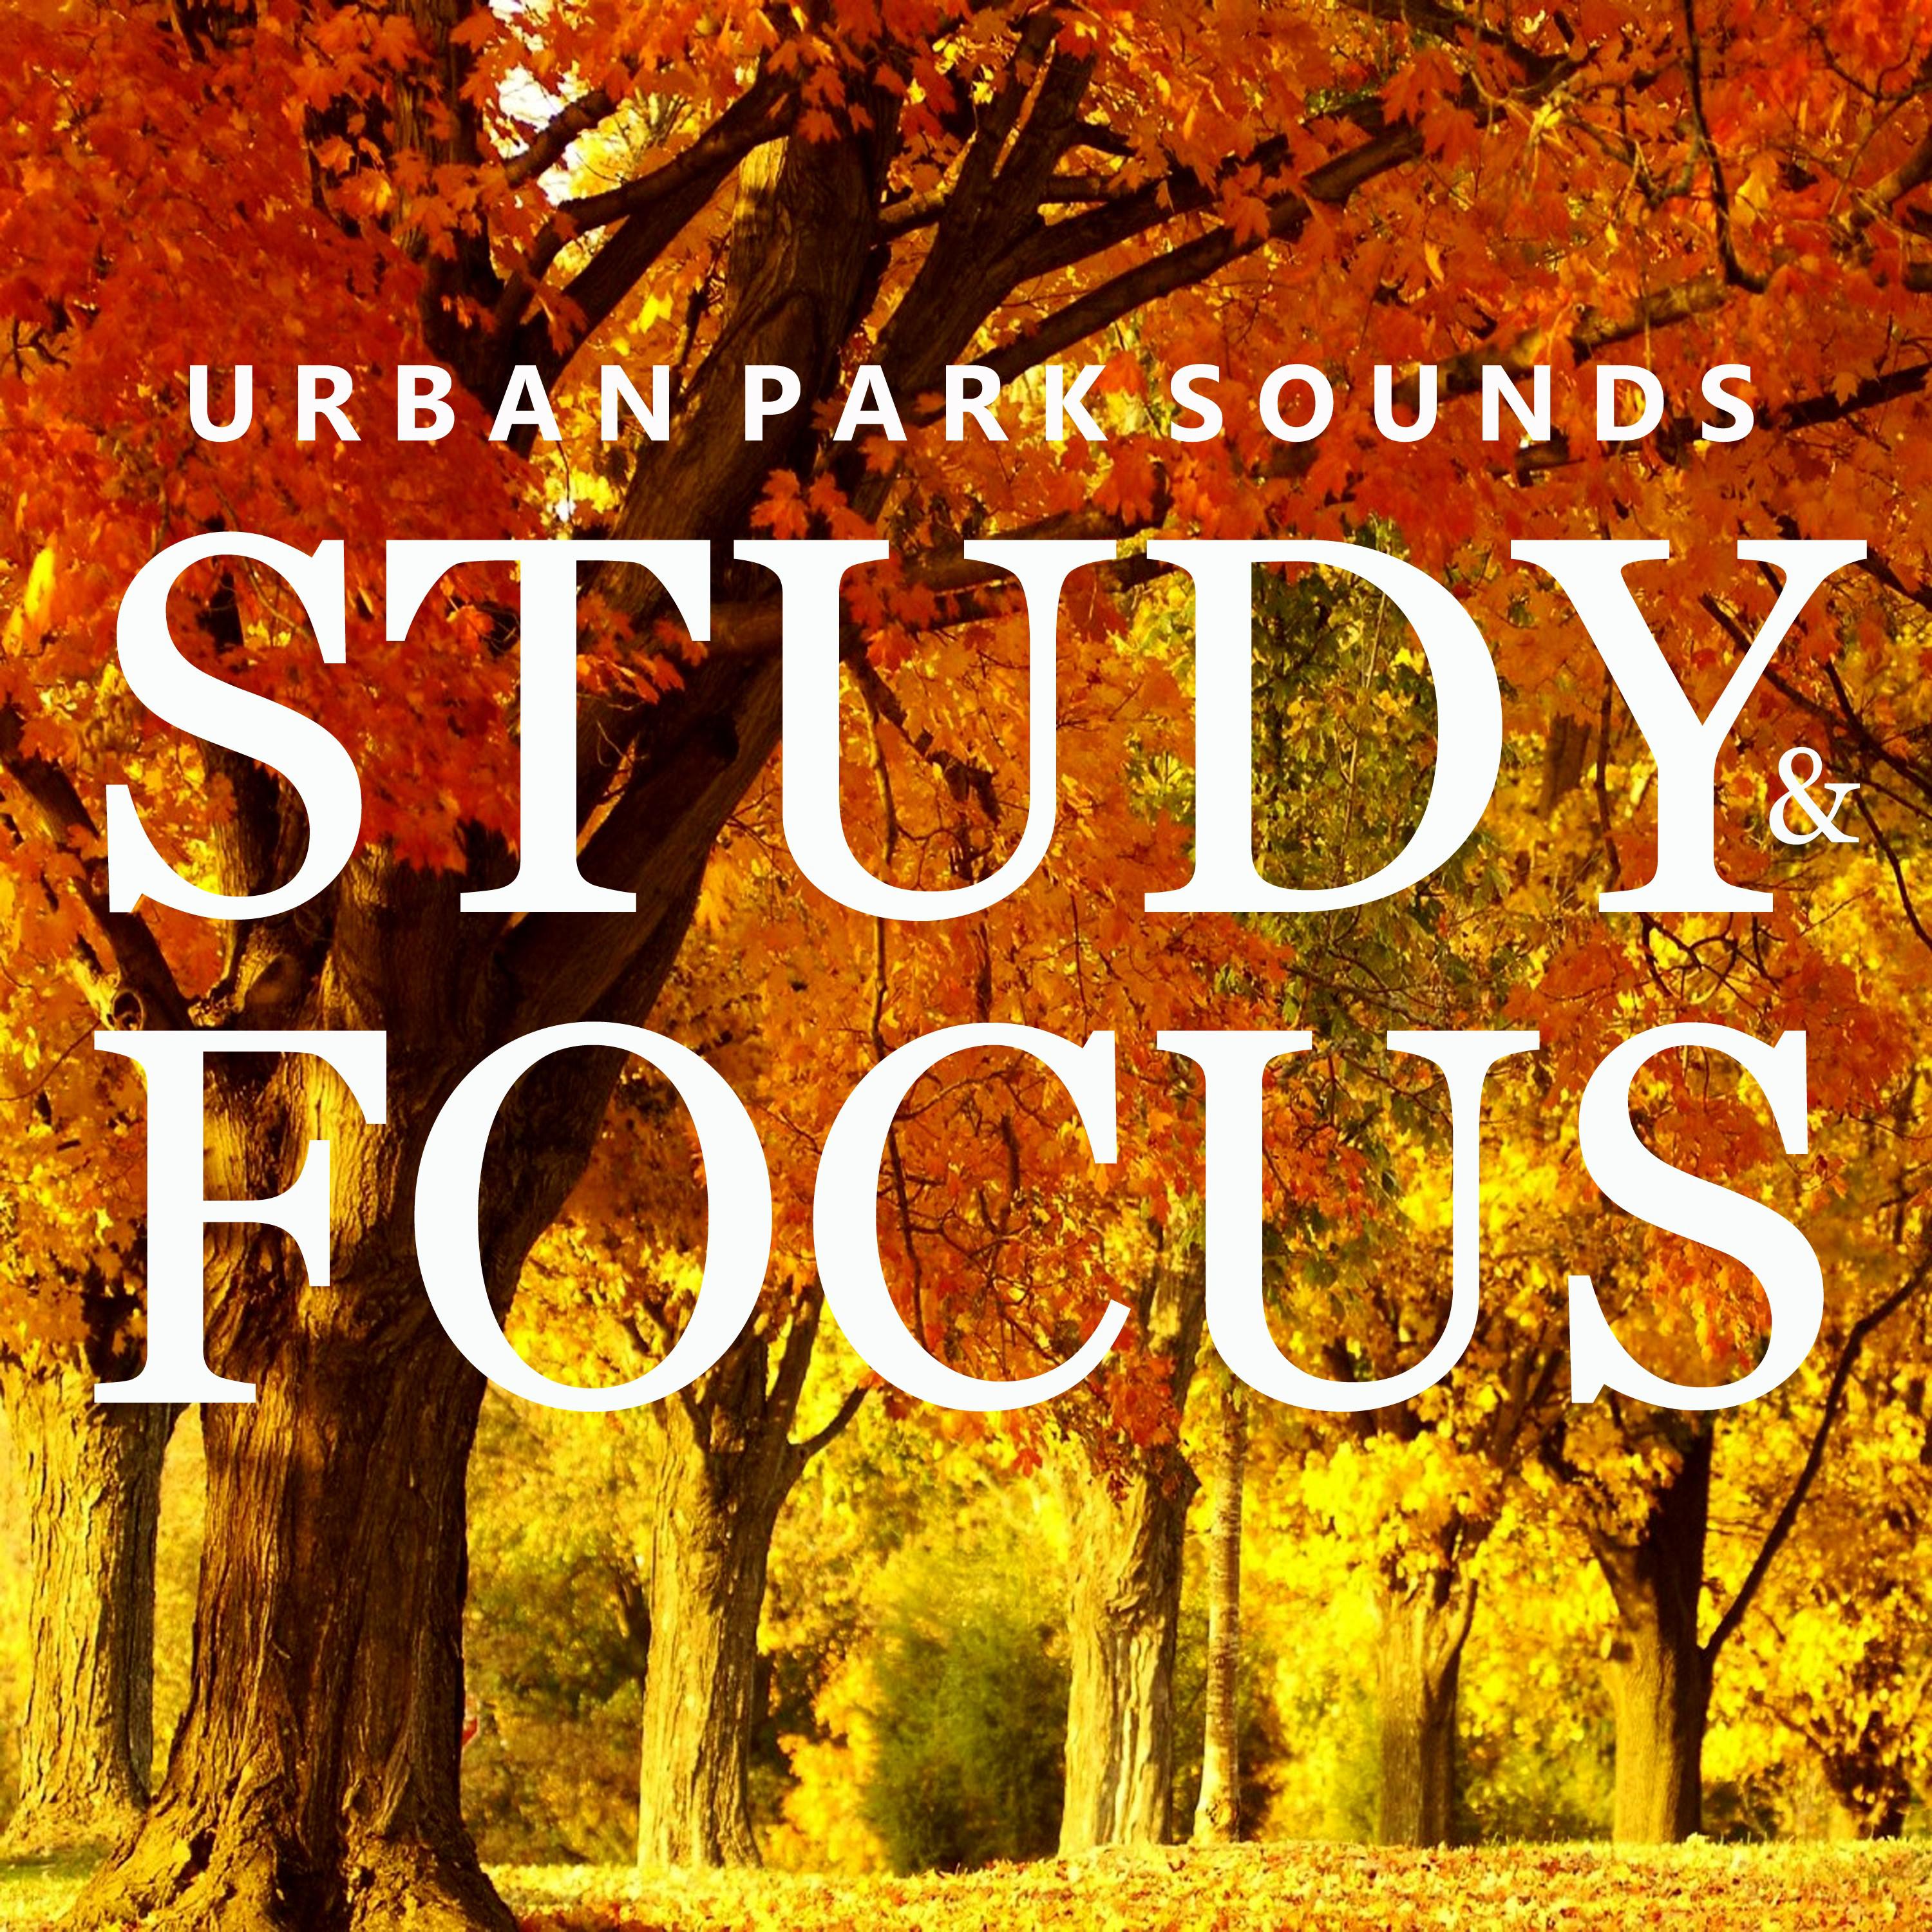 Urban Park Sounds for Studying, Pt. 28